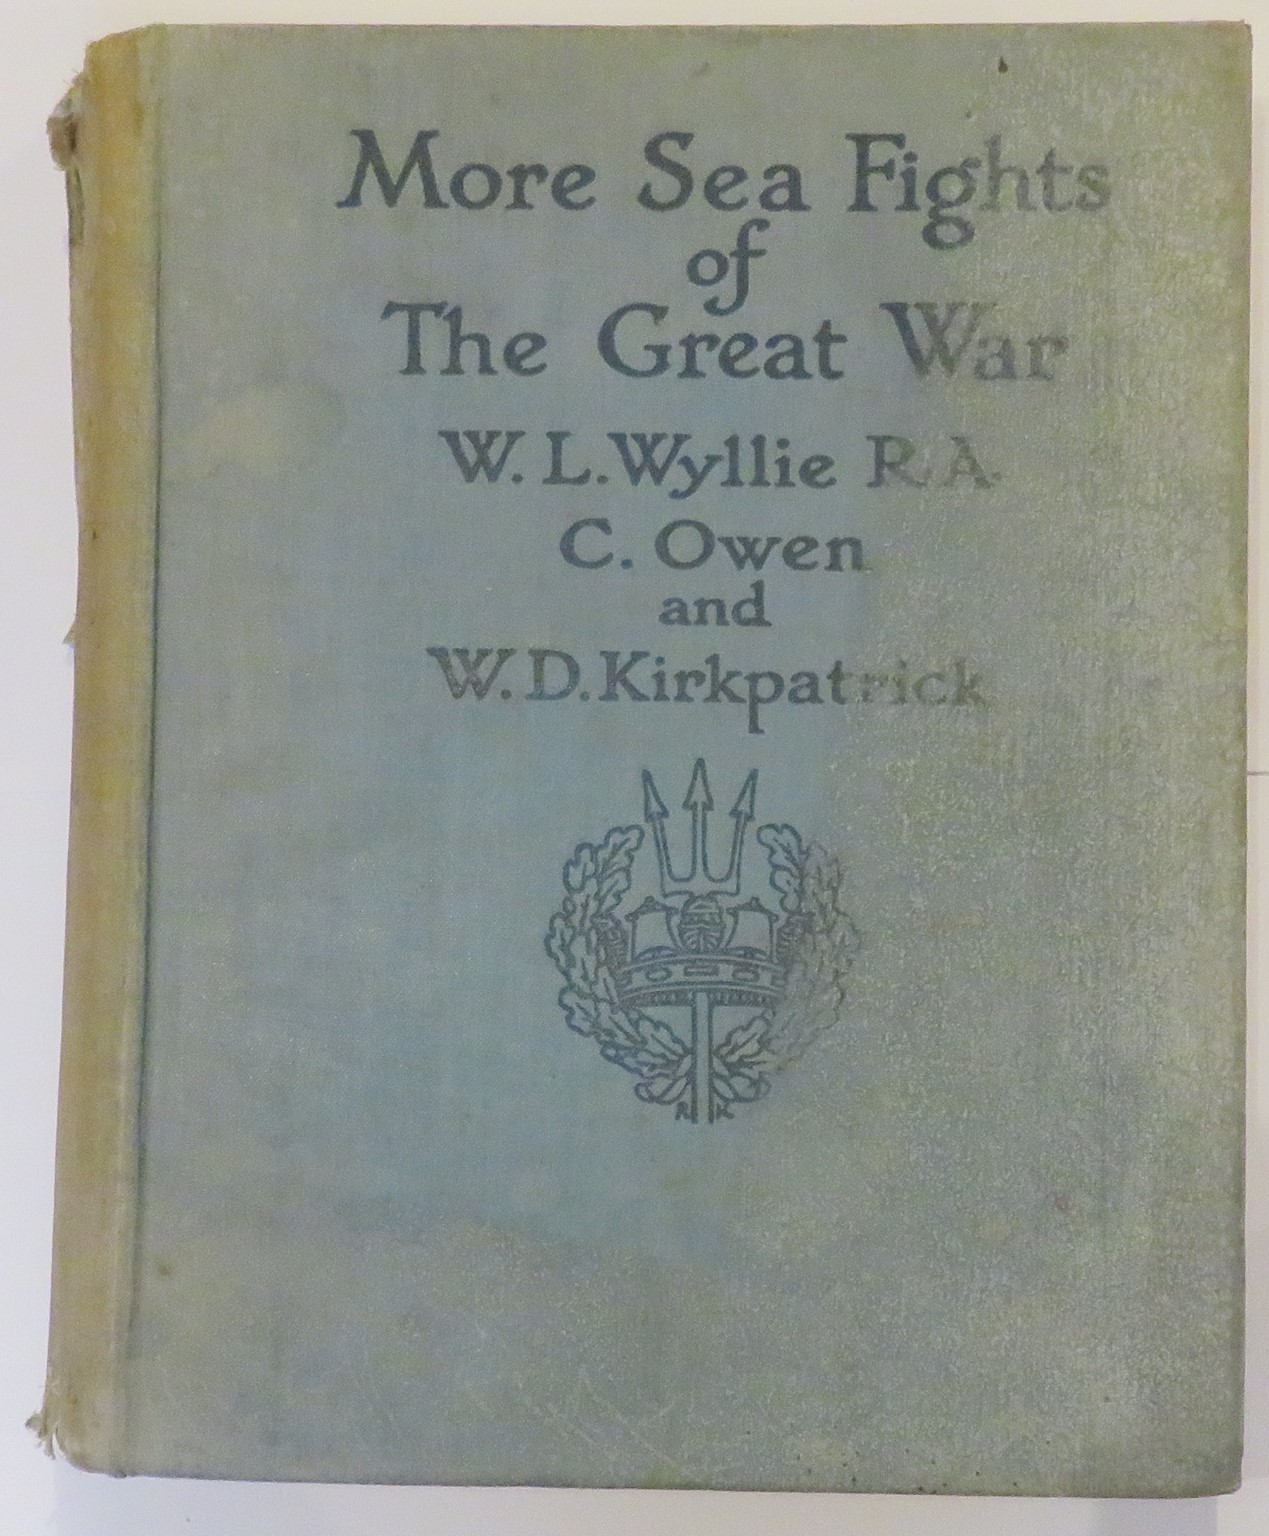 More Sea Fights of The Great War 